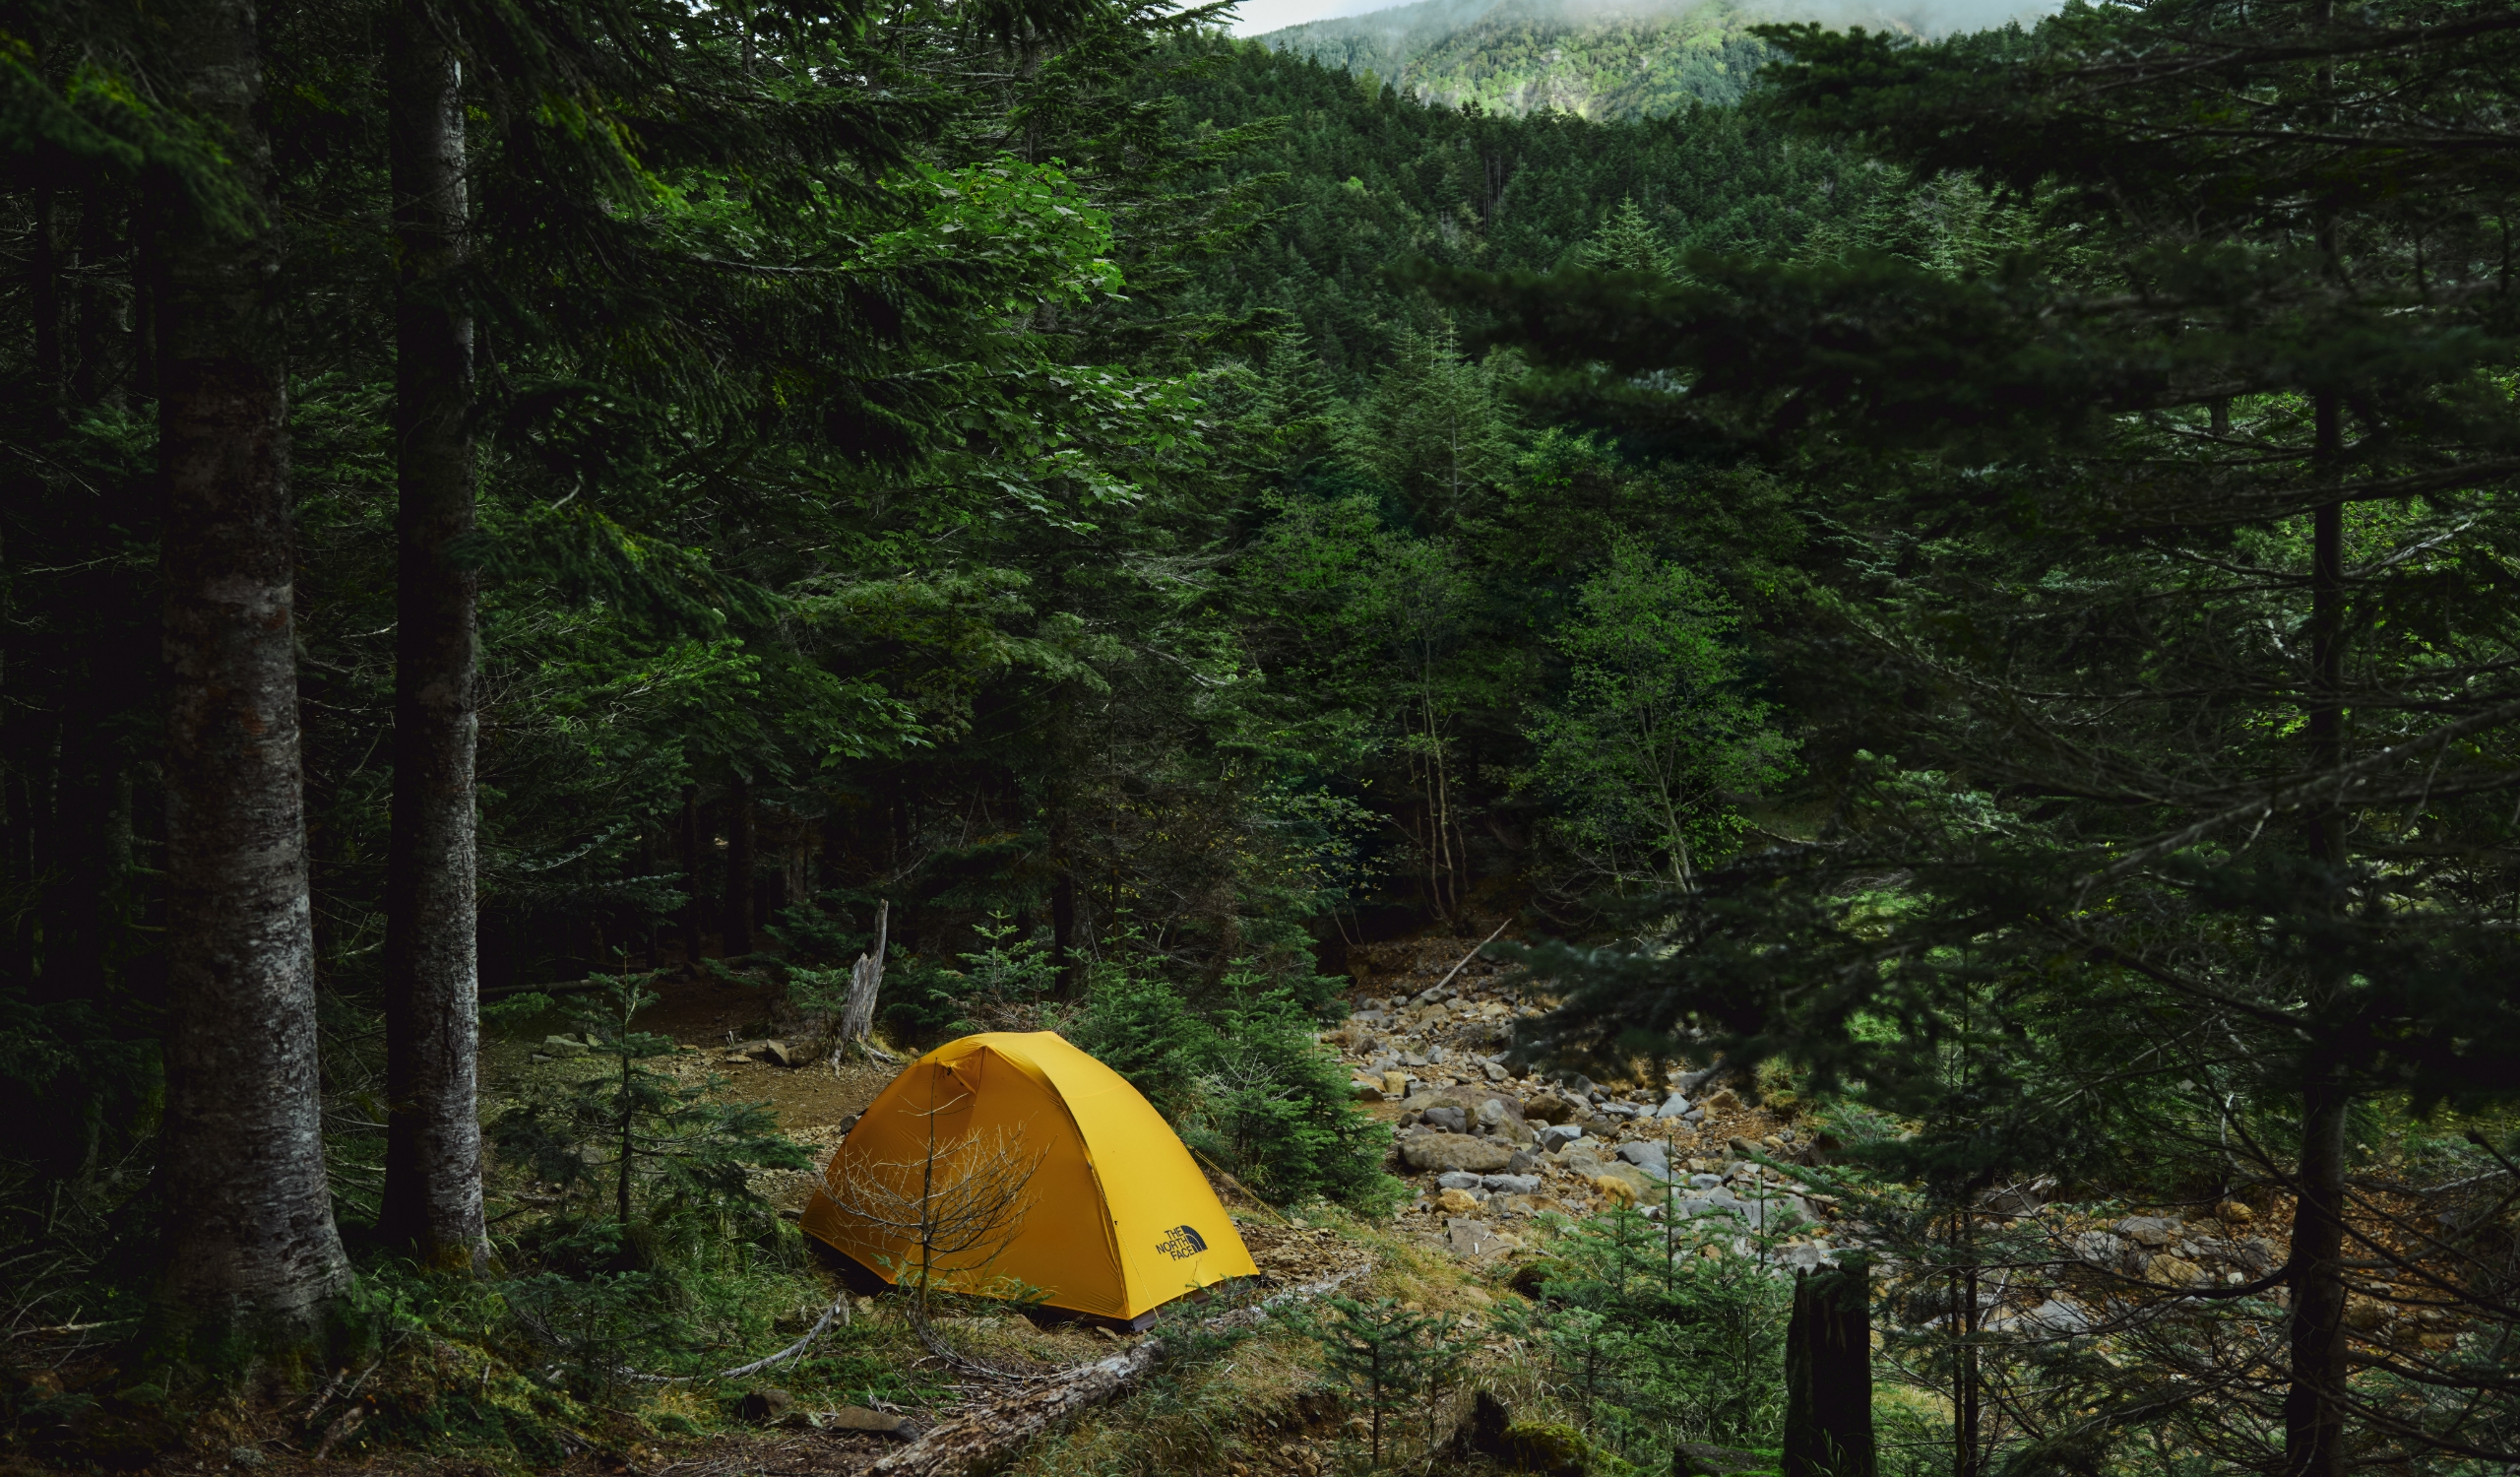 Mountain Shot 1 | Online Camp Store | THE NORTH FACE CAMP